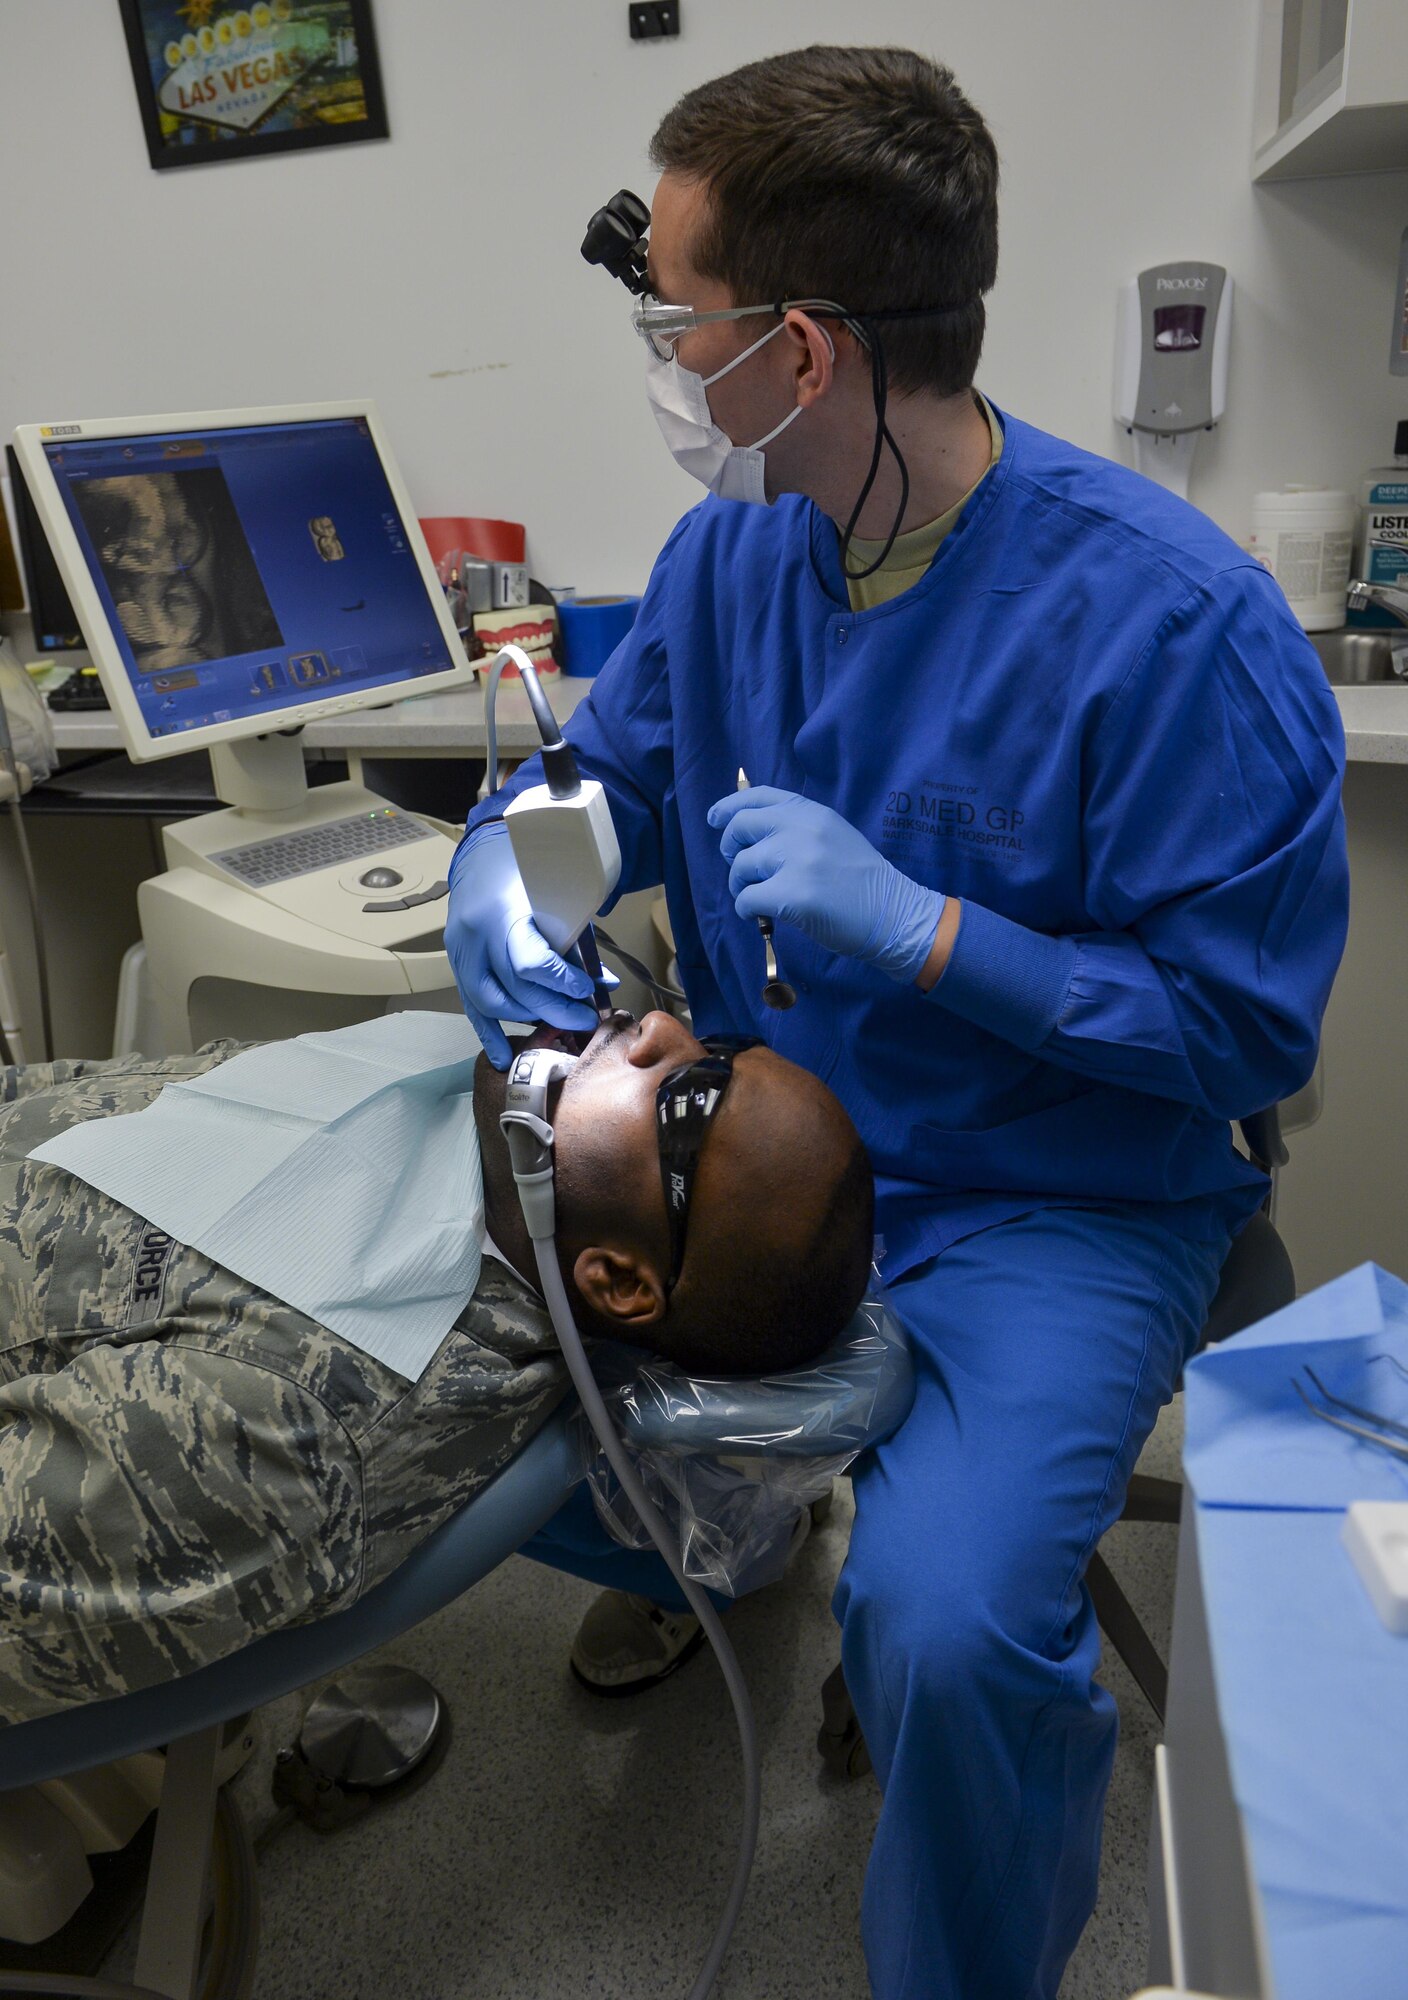 Capt. (Dr.) Derek Sloan, 2nd Dental Squadron general dentist, takes an optical impression during an exam at Barksdale Air Force Base, La., Feb. 12, 2016. Optical impressions replaced the old wet impression, process decreasing the time needed to create a physical cast. The new process reduced completion of crowns from two weeks to approximately two hours. (U.S. Air Force photo/Airman 1st Class Mozer O. Da Cunha)